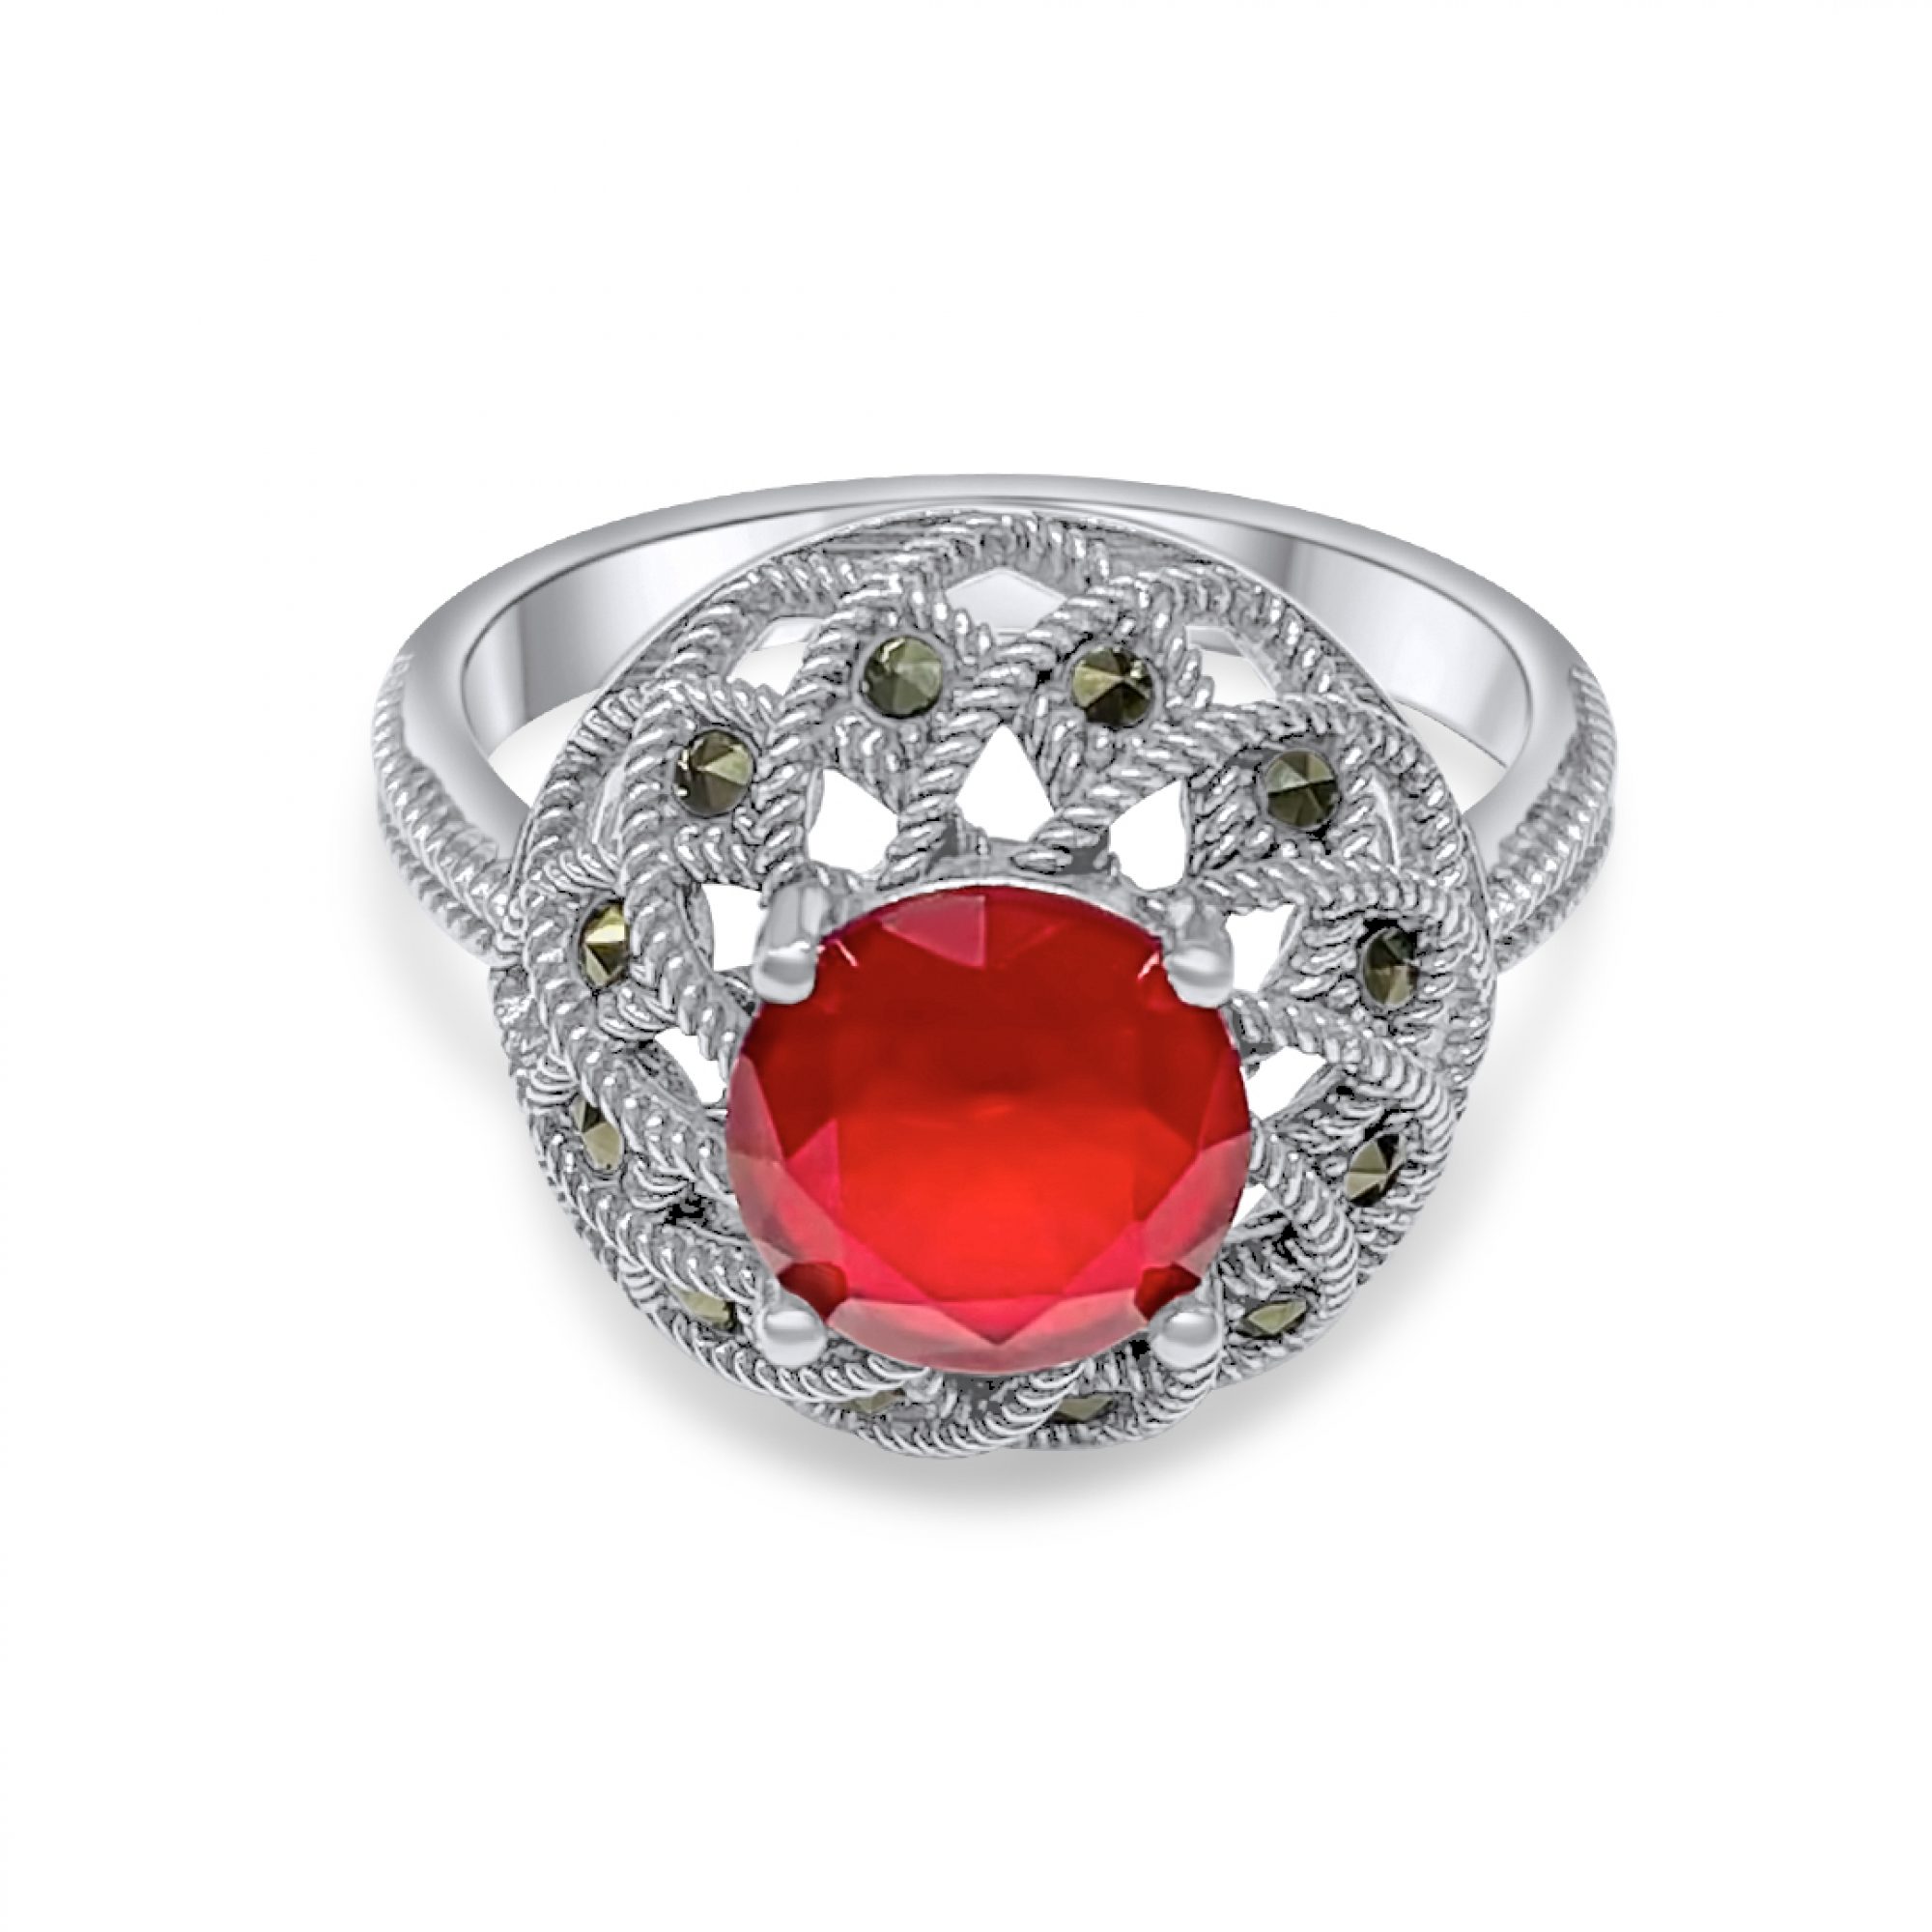 Ring with ruby stone and marcasites